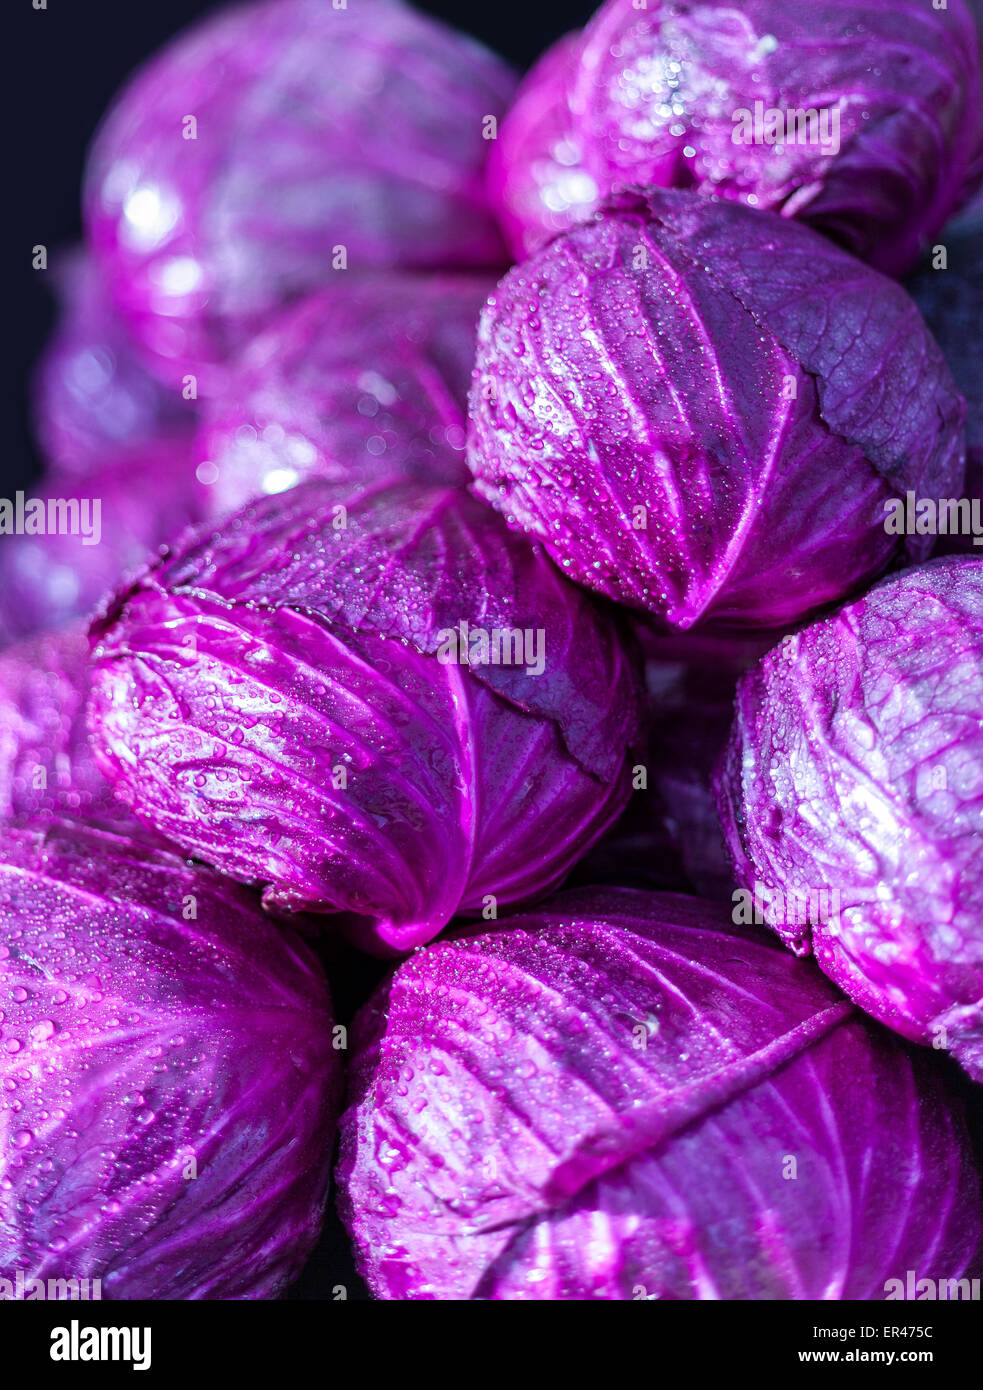 Purple cabbage in market place Stock Photo